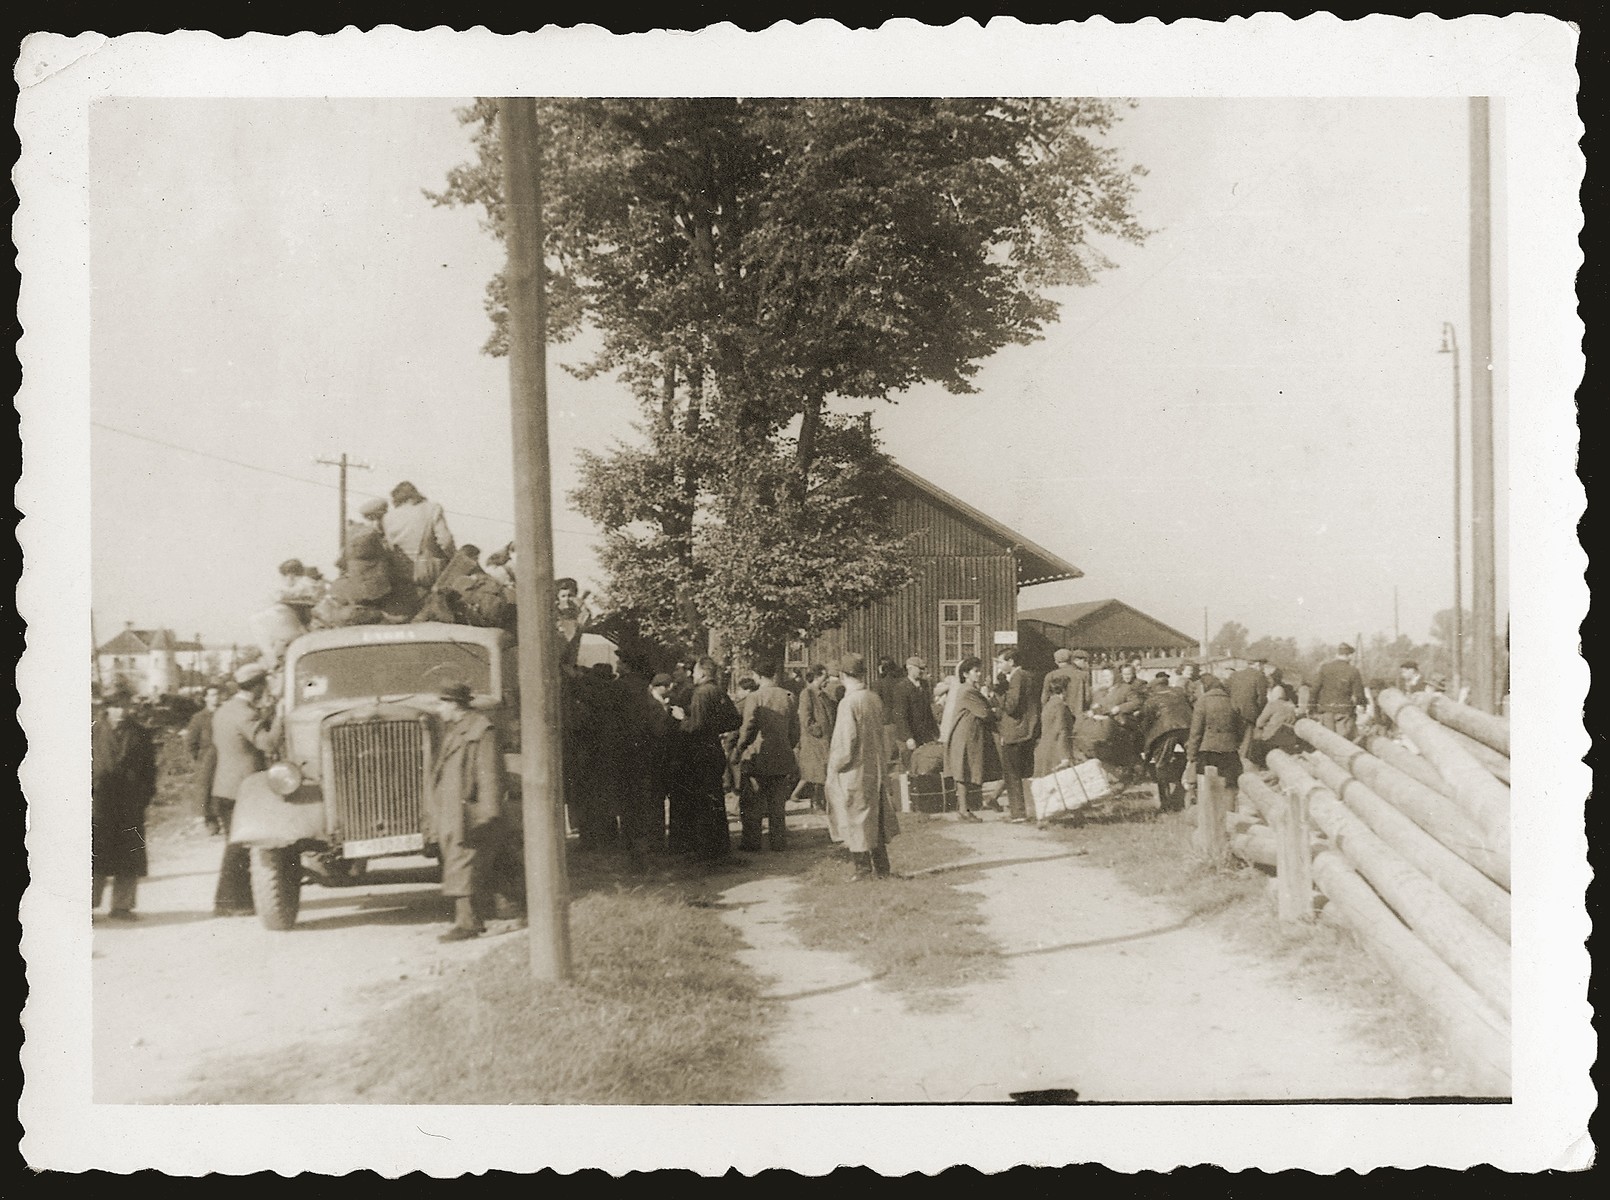 Newly arrived Jewish DPs from eastern Europe are gathered near the Enns River in Austria.  They will be taken by truck to nearby displaced persons camps after a second transport arrives from Vienna.